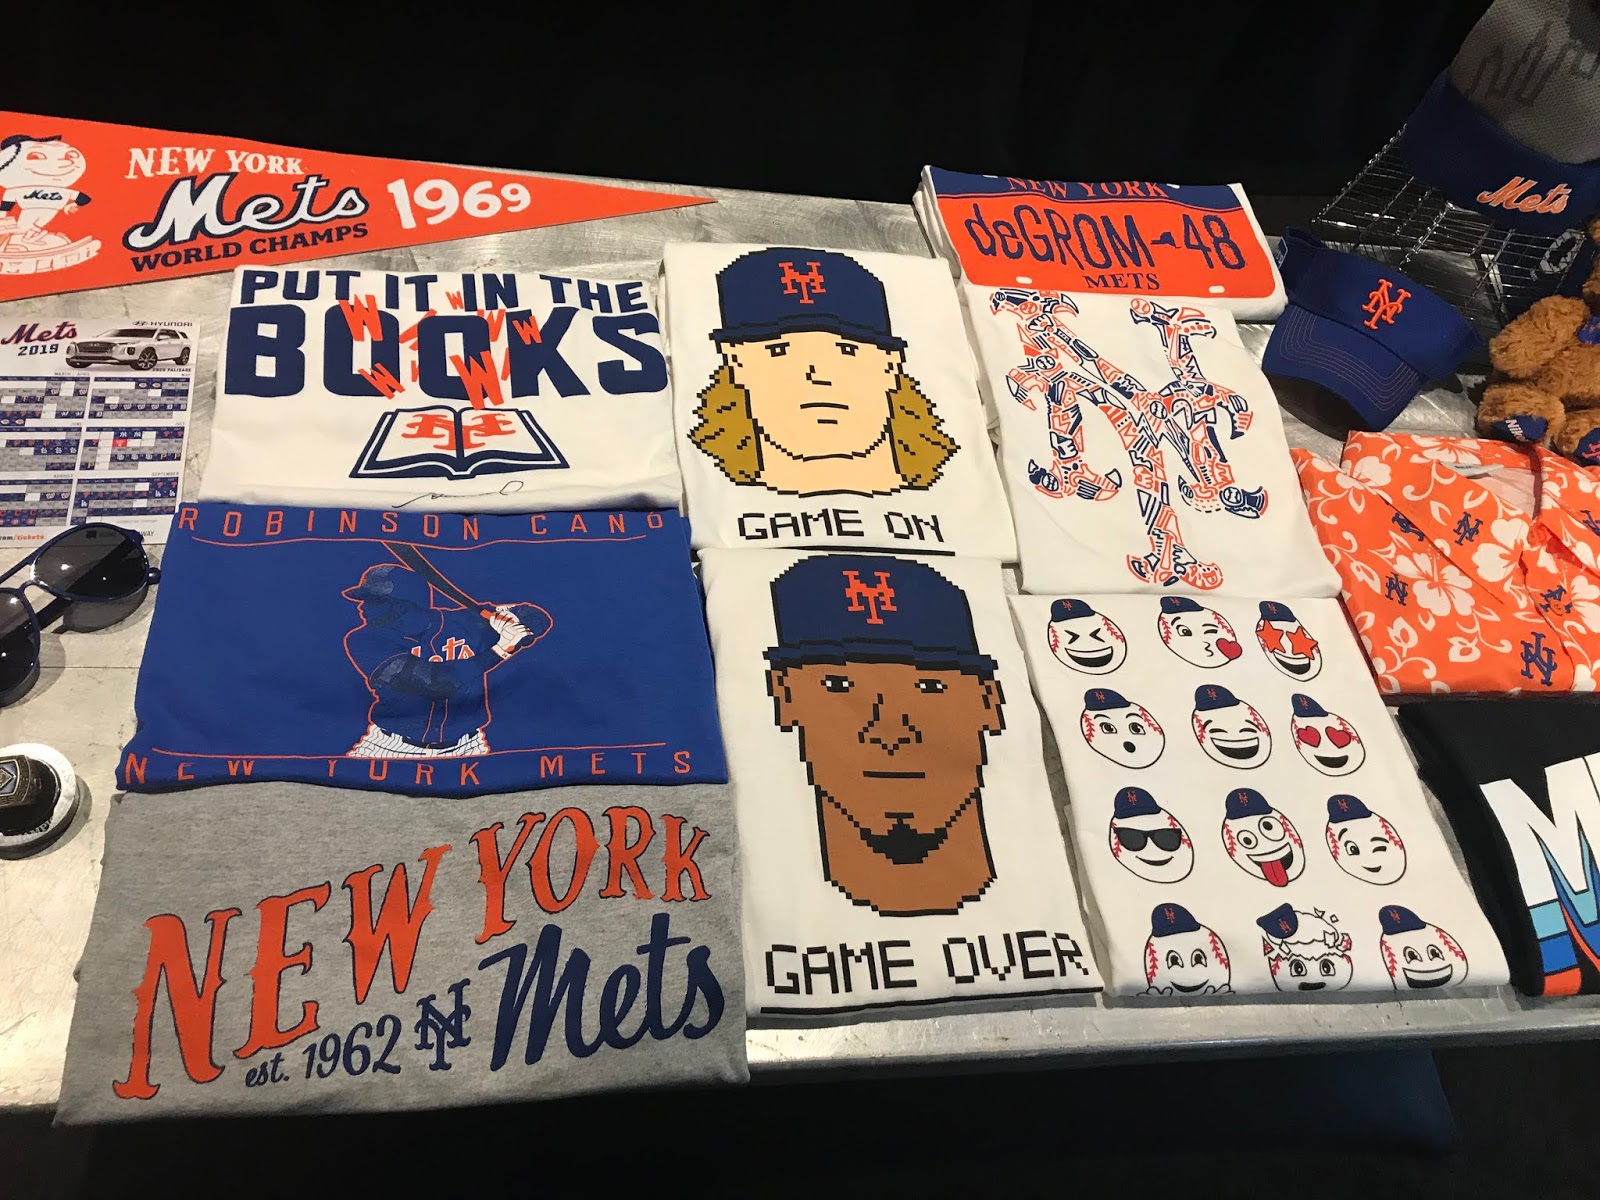 Brooklyn Digest: New At Citi Field This Season - Mets Home Opener Is April 4